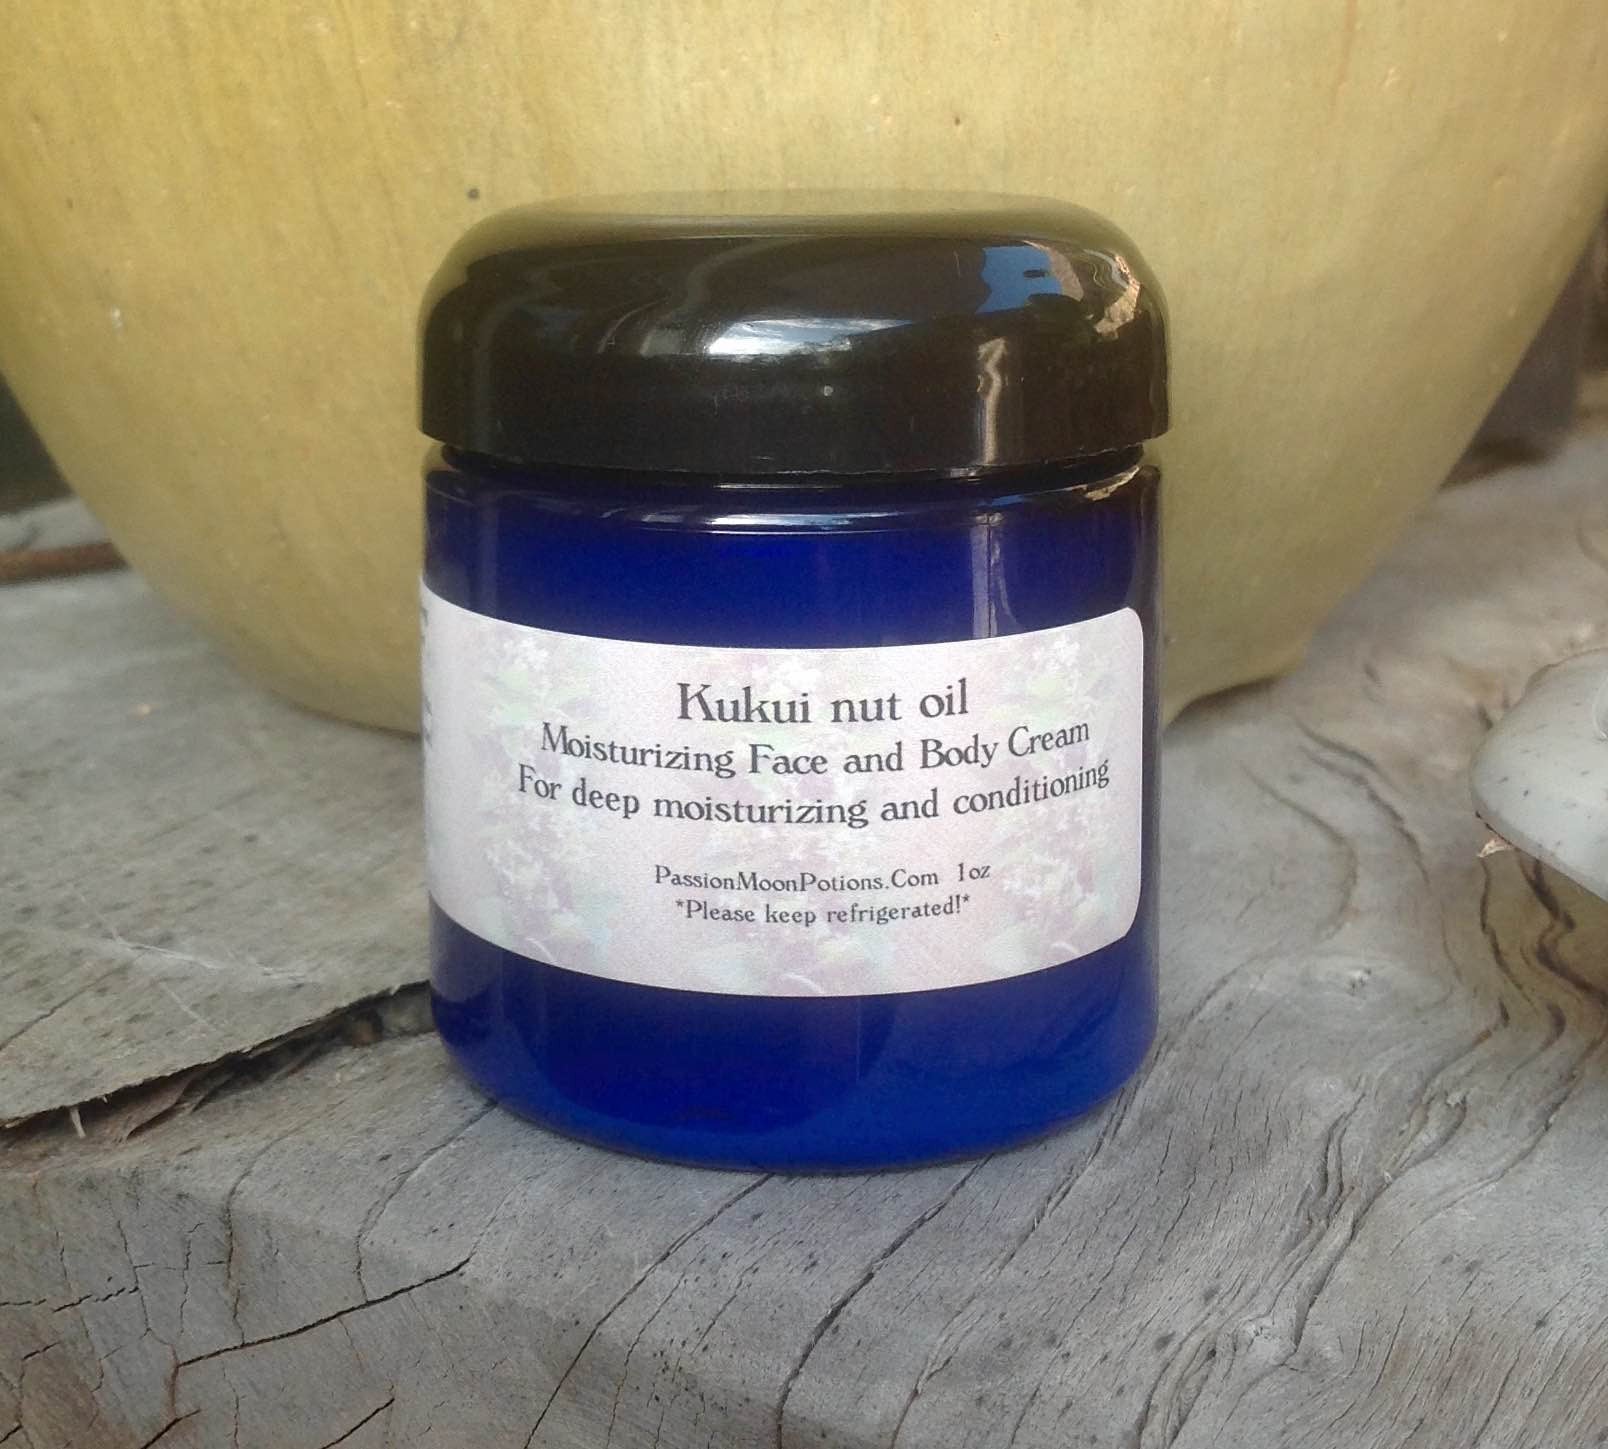 Kukui Nut Oil Moisturizing Face and Body Cream - Passion Moon Potions - 2